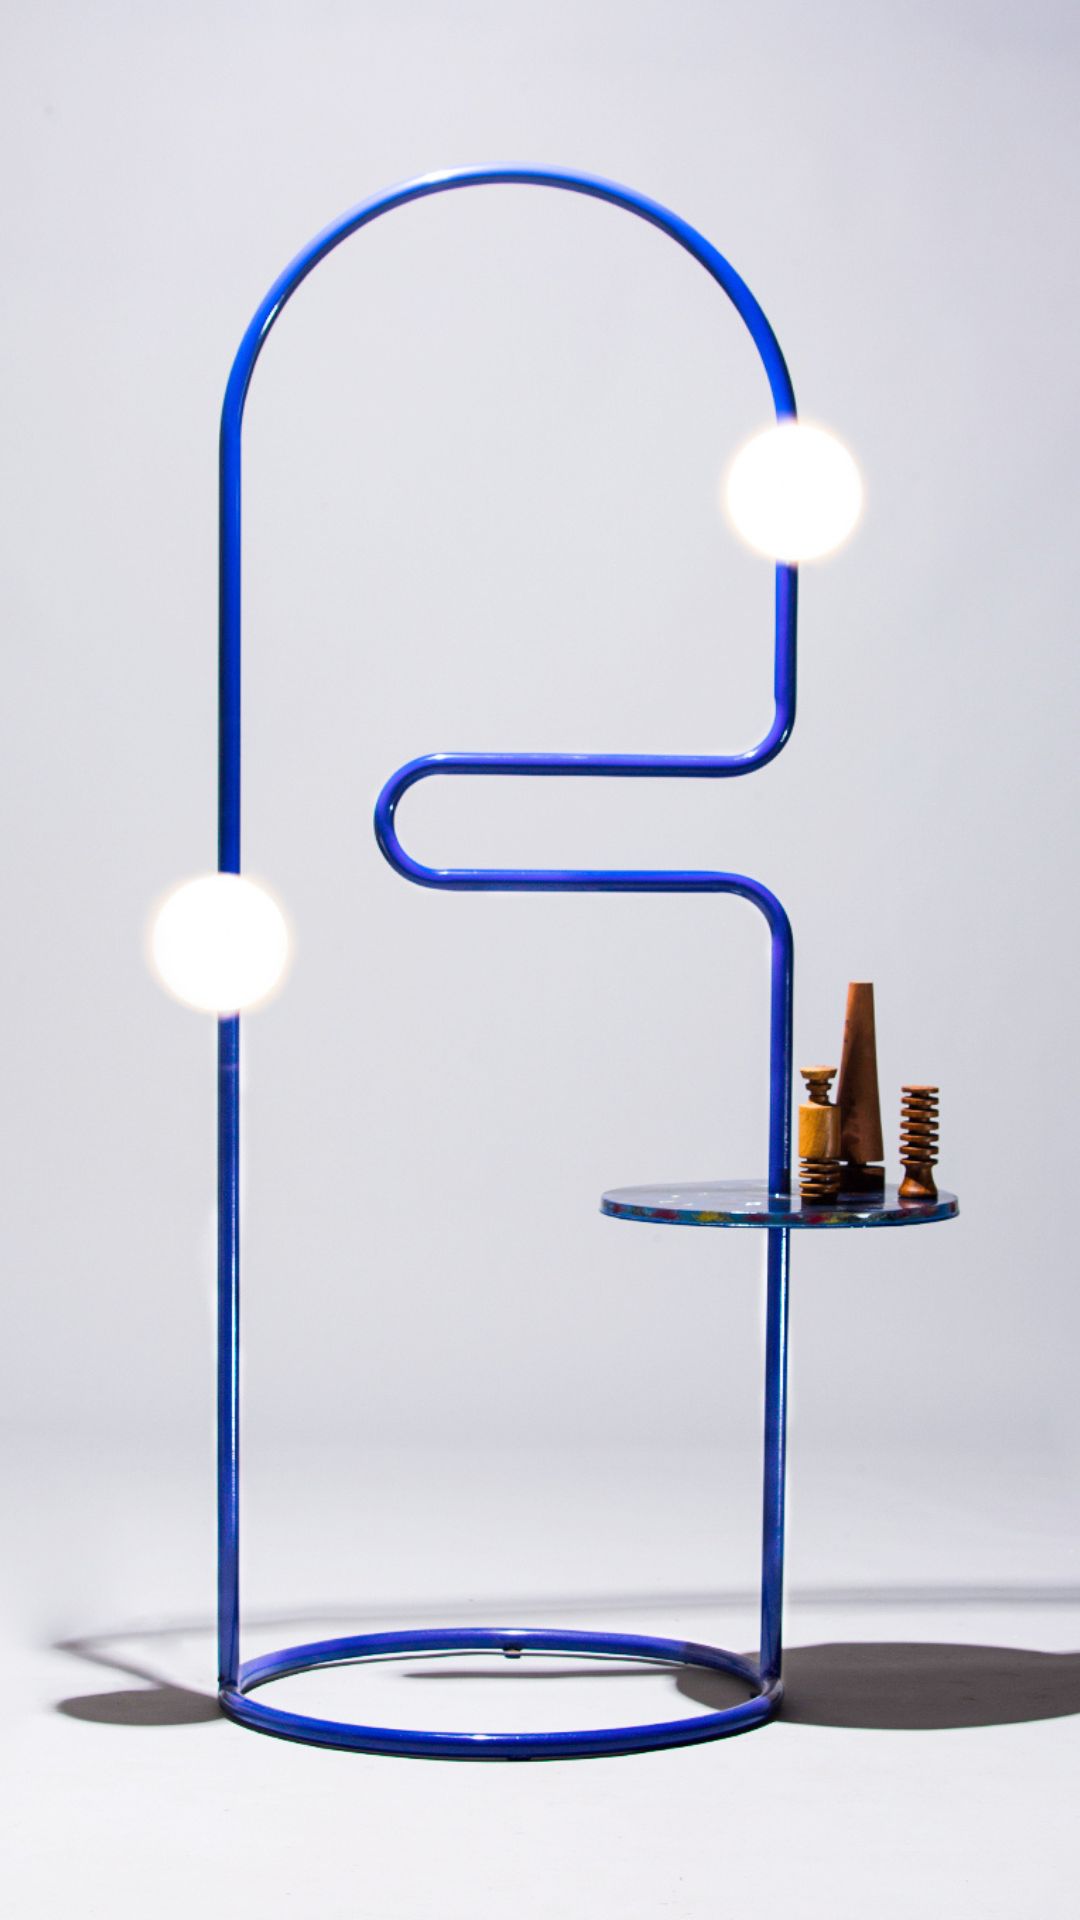 The pod light is one of the items from the collection made out of pharmaceutical waste